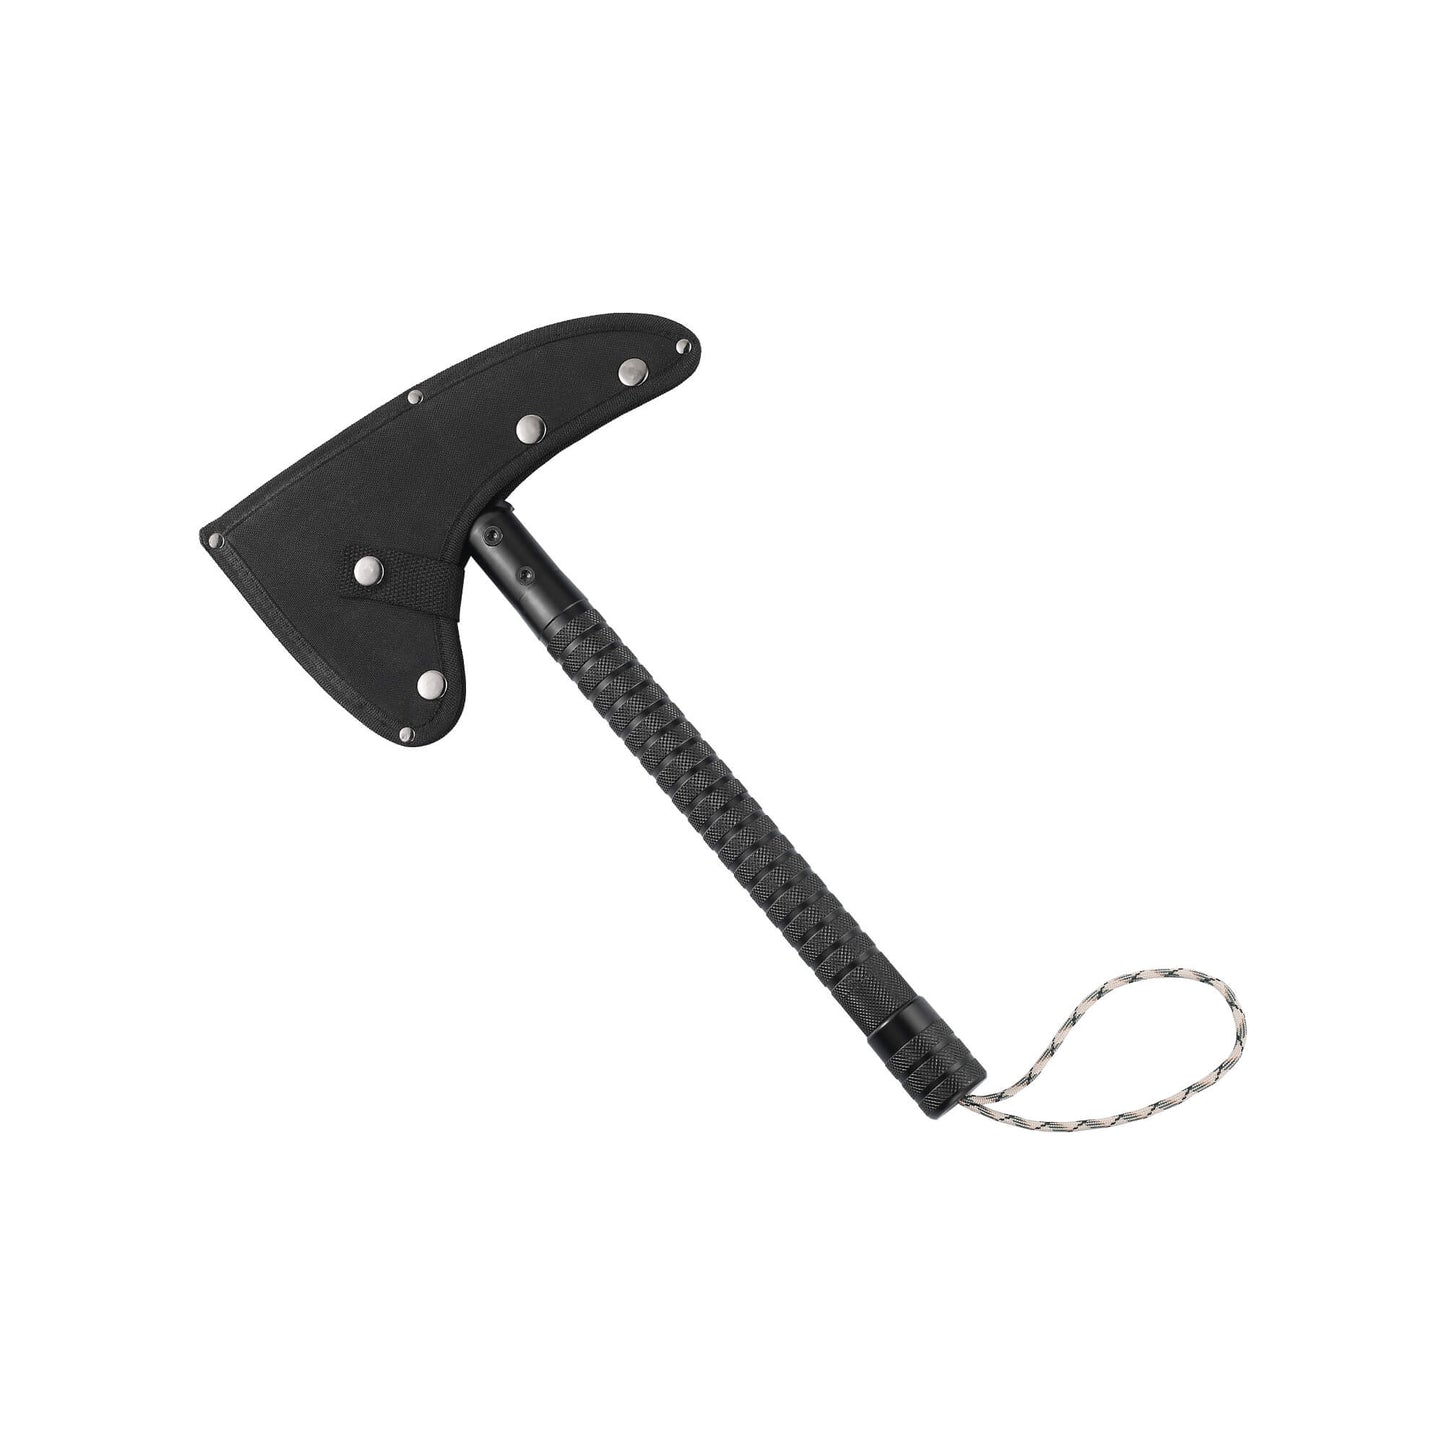 Tactical BEAK Ax, multi-feature camping tool with knife, saw, bottle opener, whistle, flint, compass, glass breaker and more.